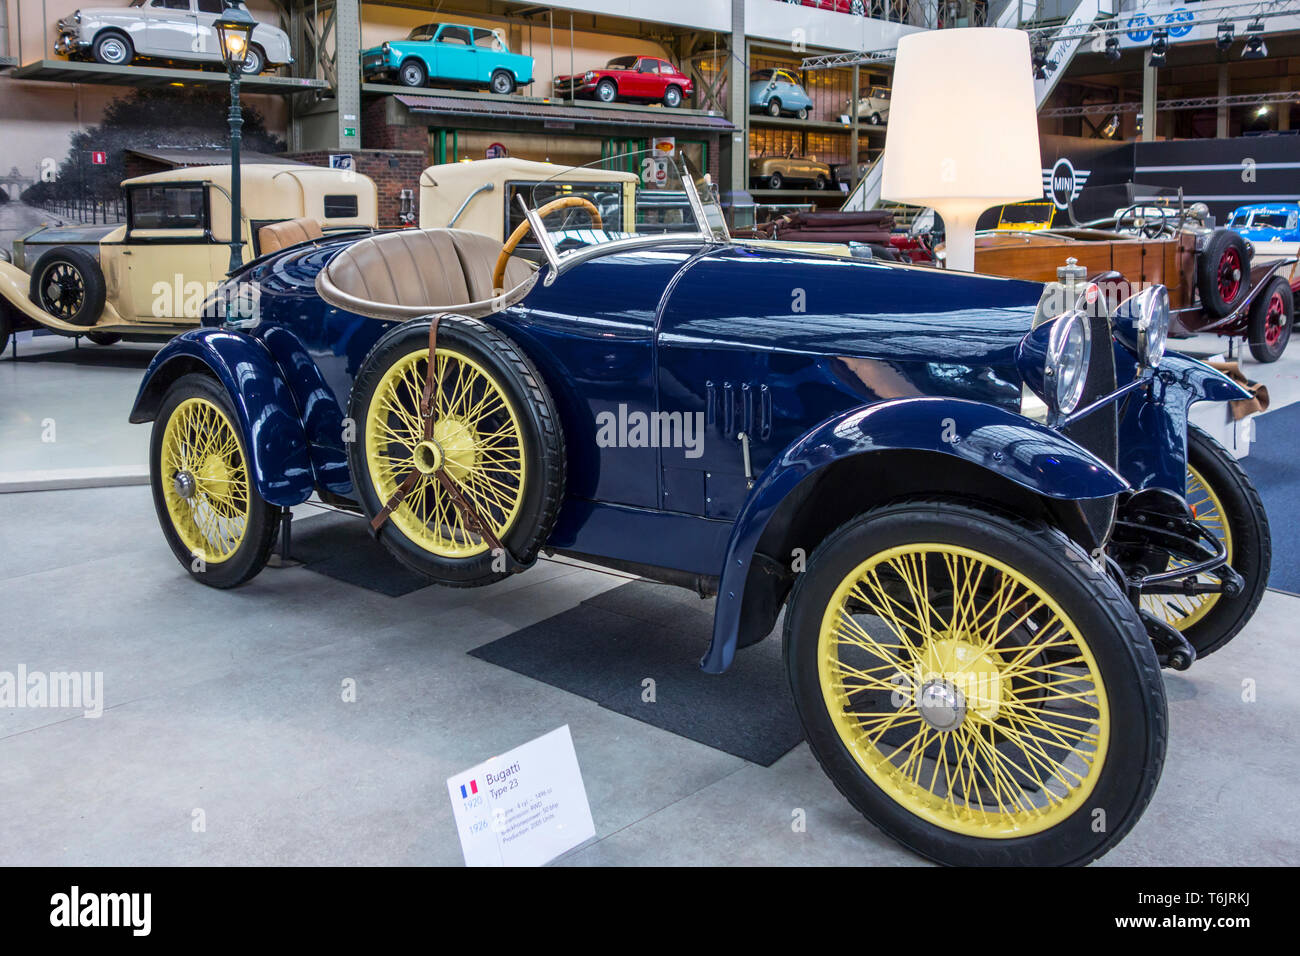 1921 Bugatti Type 23 Brescia two-seater, French classic automobile / oldtimer / antique vehicle at Autoworld, vintage car museum, Brussels, Belgium Stock Photo